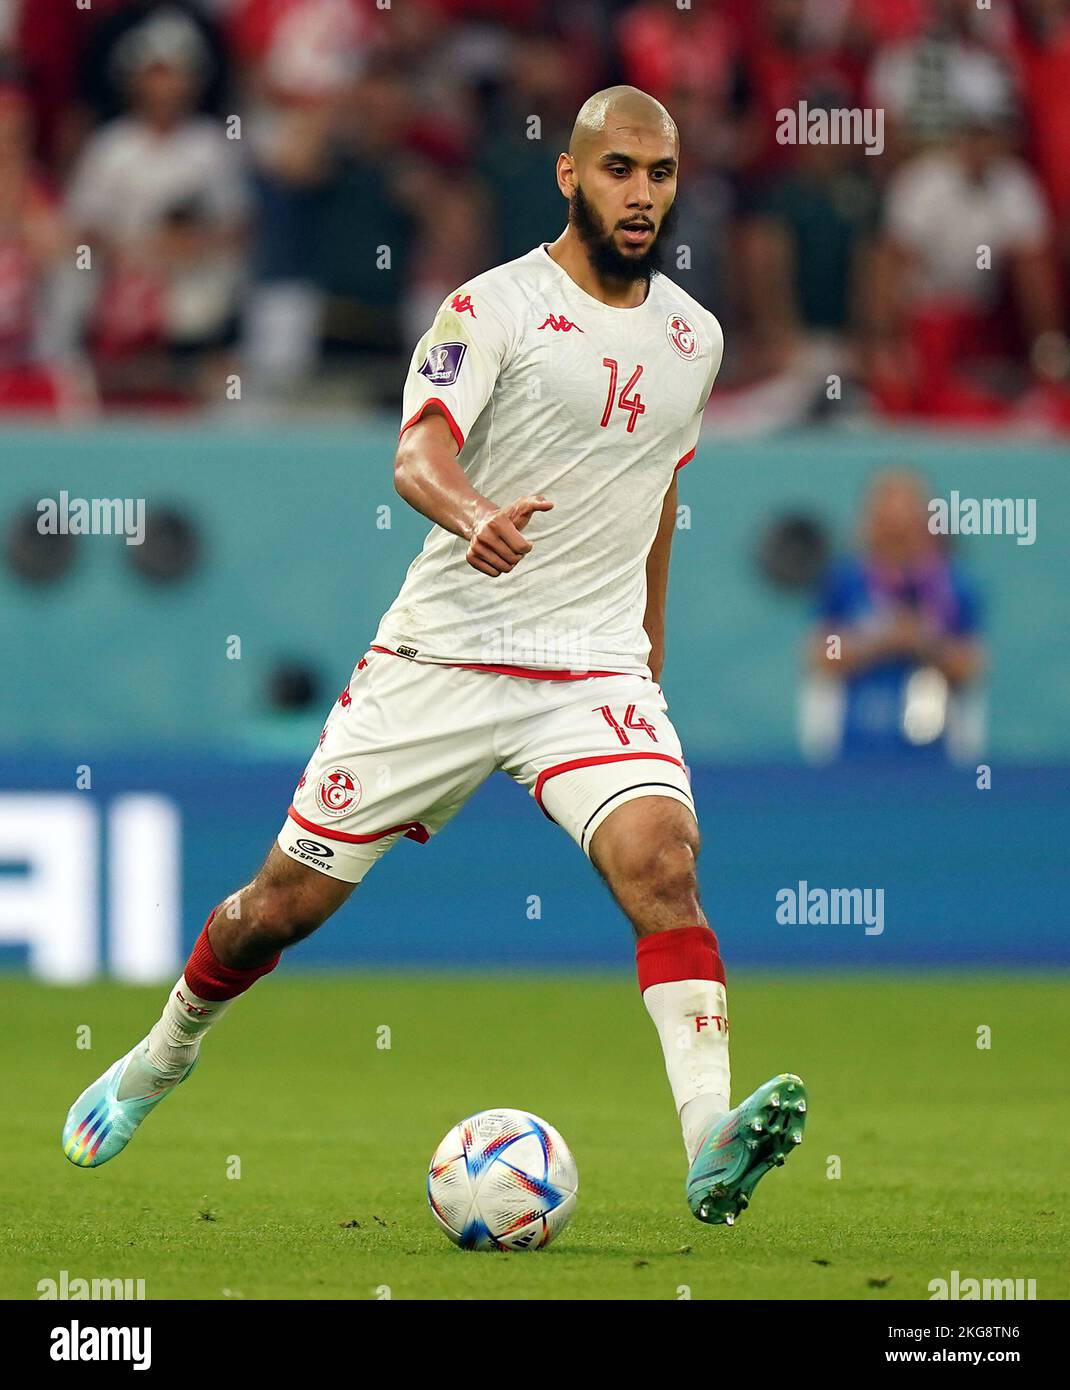 Tunisia’s Aissa Laidouni during the FIFA World Cup Group D match at Education City Stadium, Al Rayyan, Qatar. Picture date: Tuesday November 22, 2022. Stock Photo